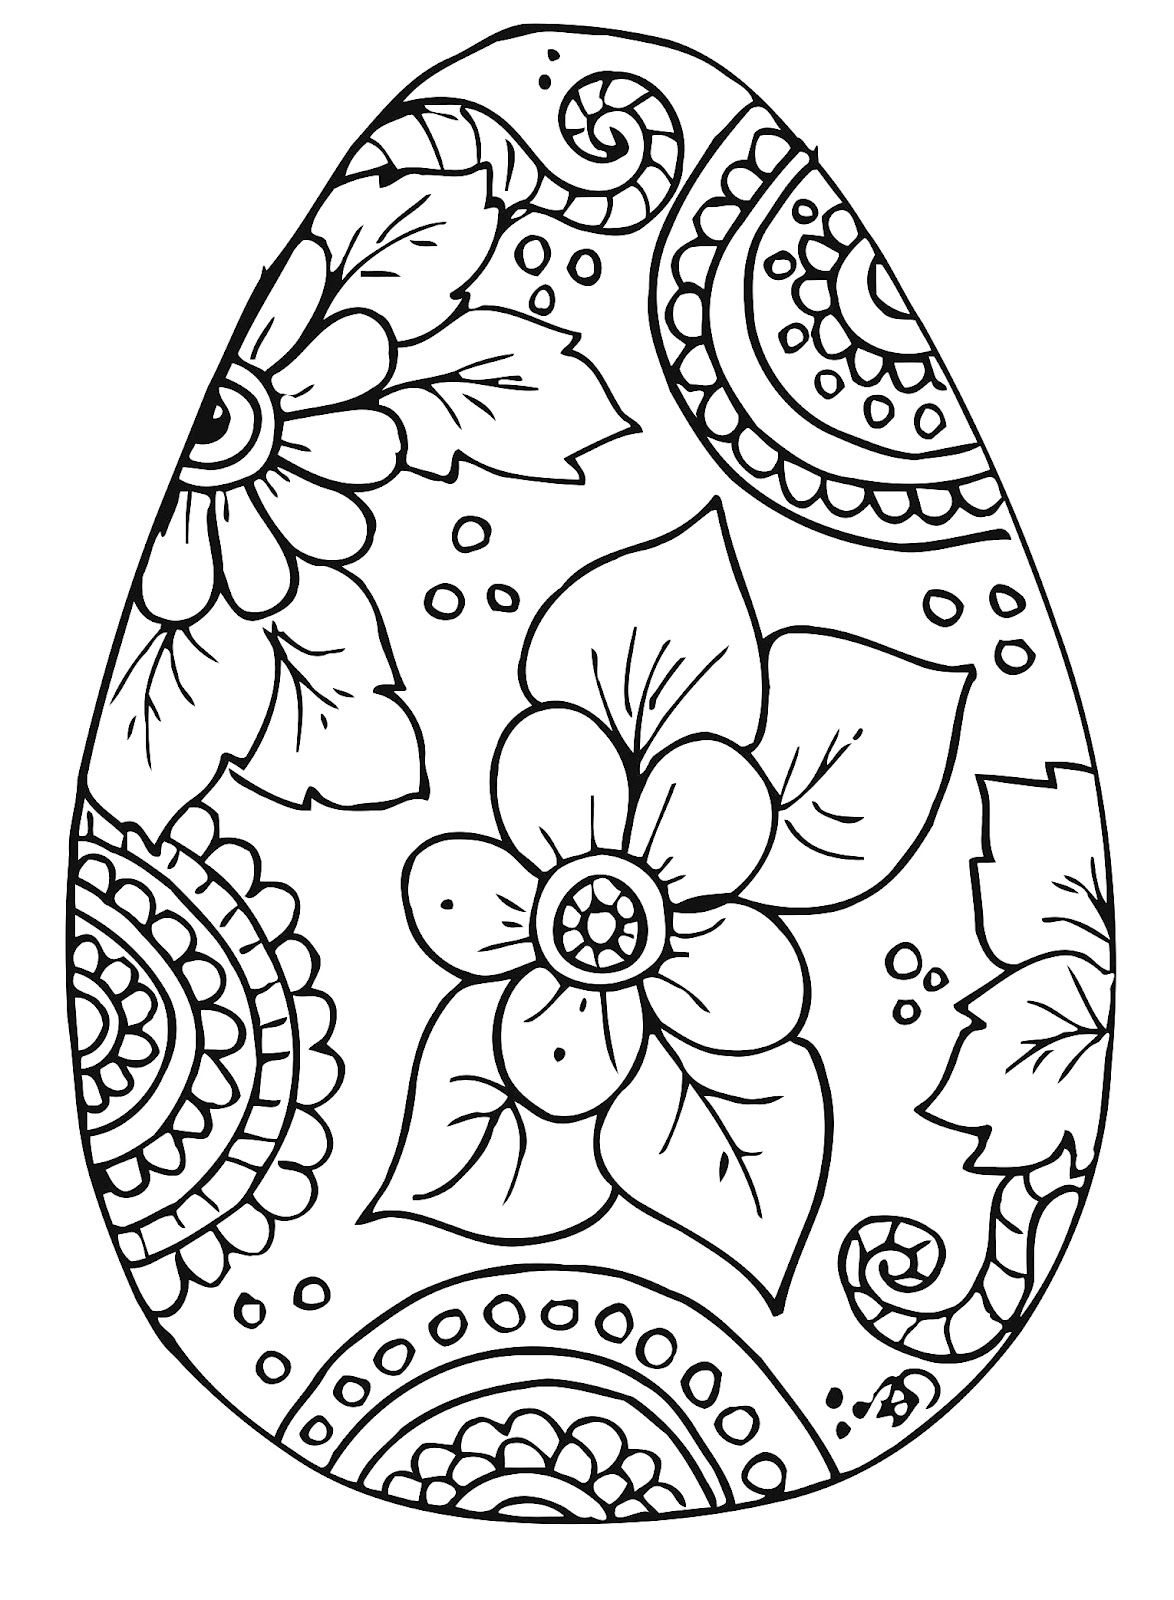 Easter egg colouring in page for parents